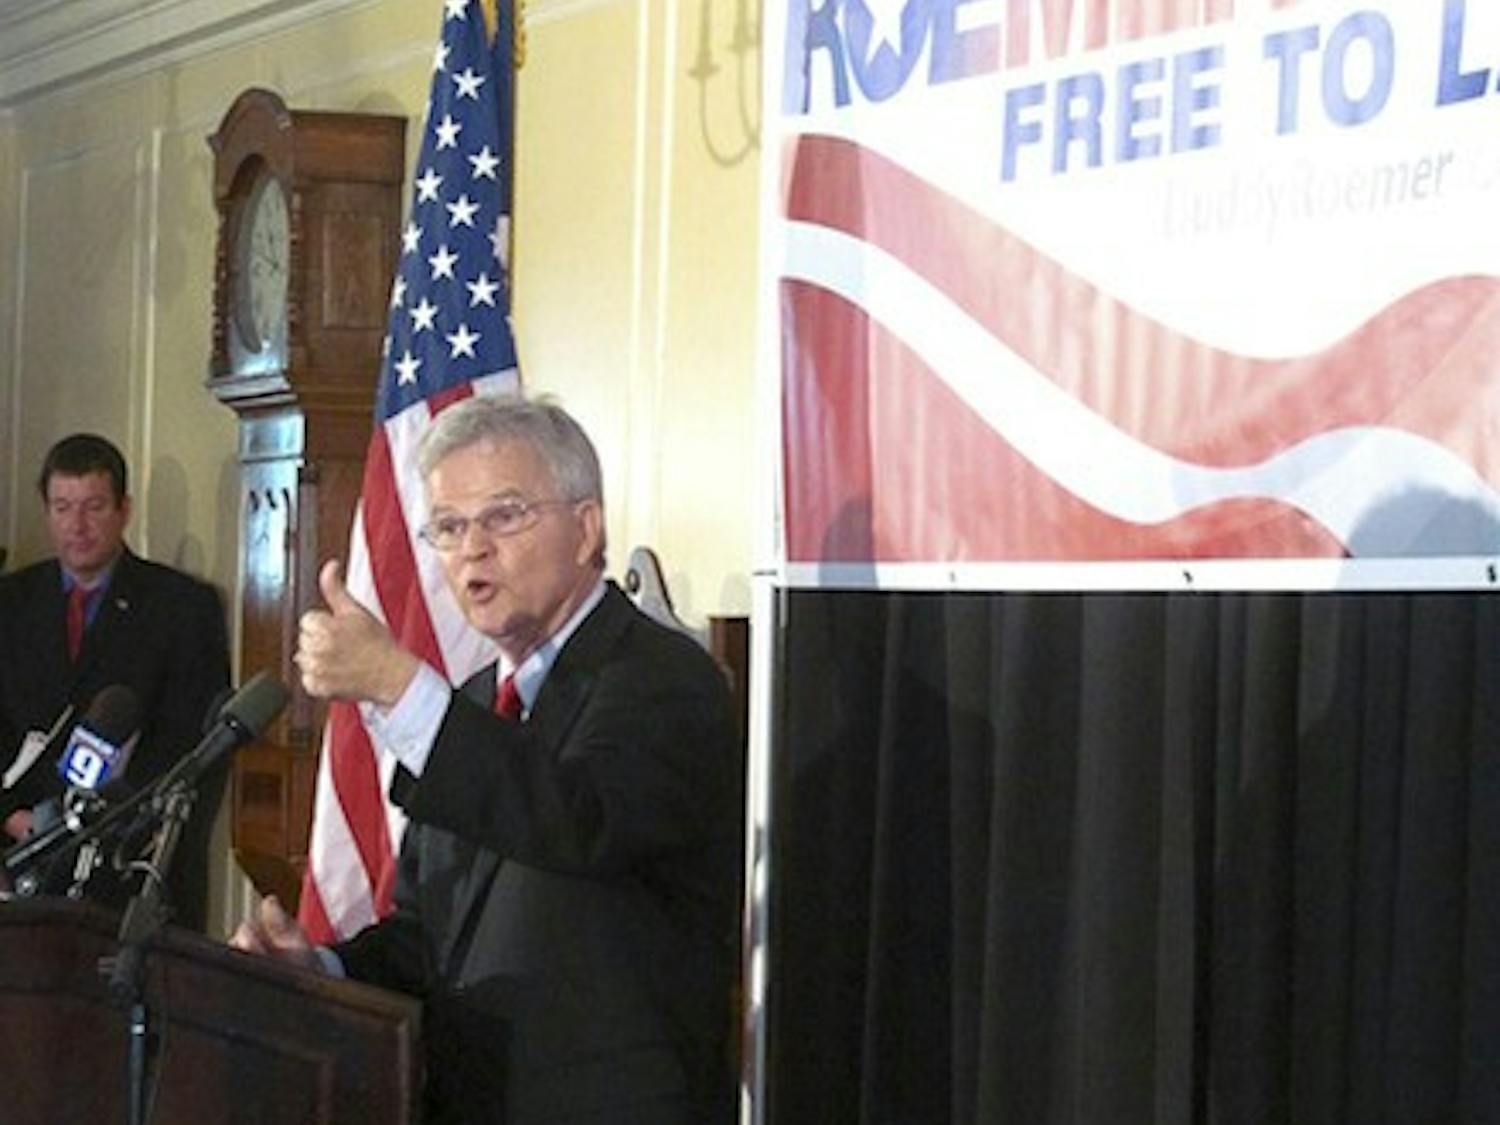 Former Louisiana Gov. Buddy Roemer spoke about the debt, fair trade and campaign finance reform in Moore Theater on Thursday.